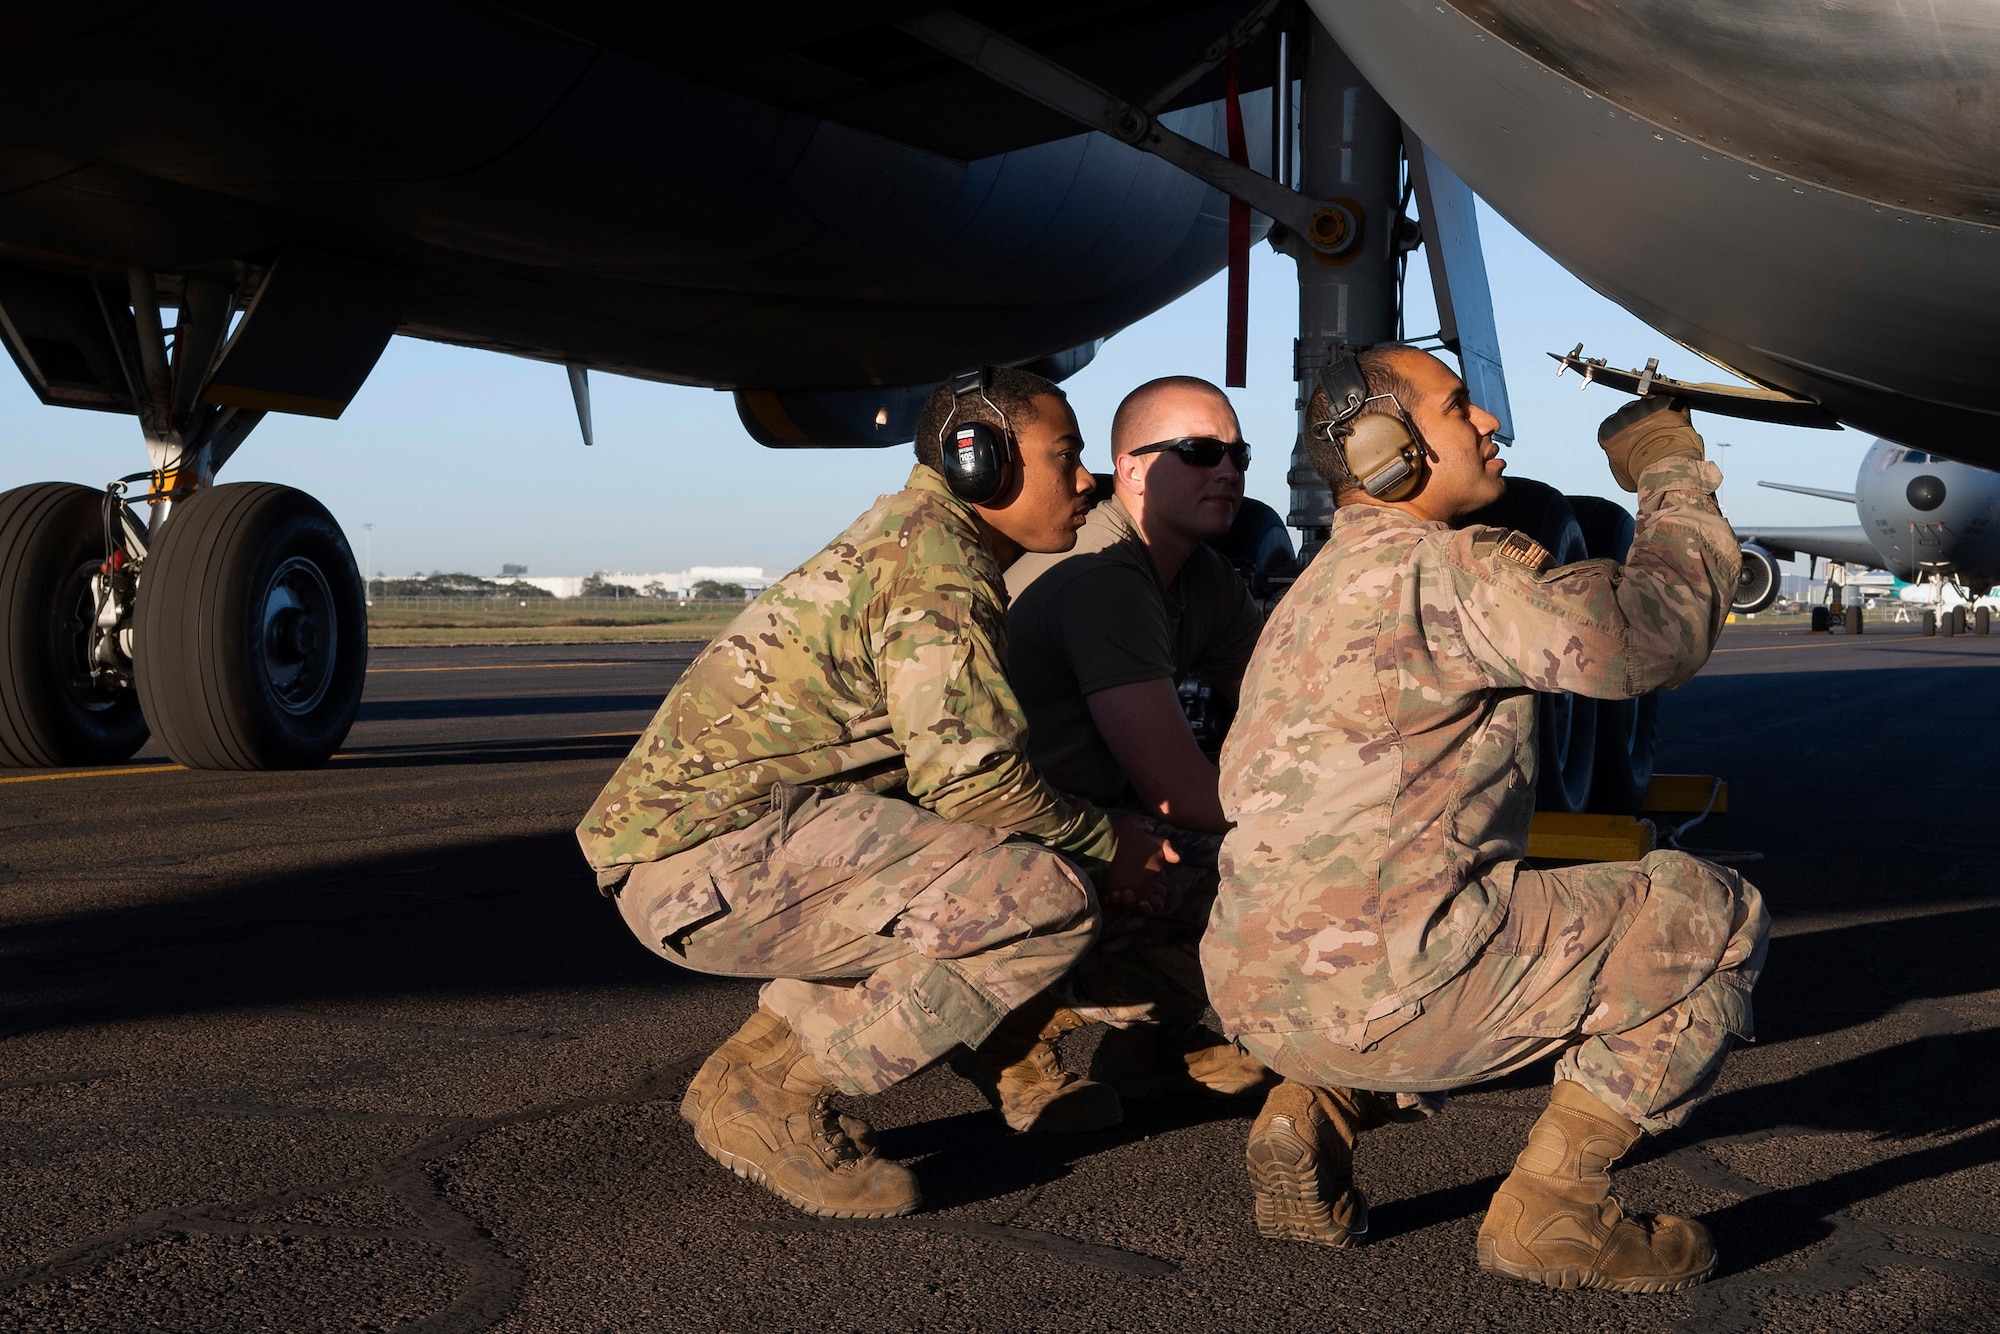 U.S. Airmen with the 605th Air Maintenance Squadron, Joint Base McGuire-Dix-Lakehurst, New Jersey, and the 60th AMXS, Travis Air Force Base, California, inspect a KC-10 Extender engine turbine during pre-flight checks July 16, 2019, at Brisbane International Airport, Australia. The Extender arrived July 12 to support major air operations for USAF, Royal Australian Air Force and U.S. Navy aircraft operating out of RAAF Base Amberley for Exercise Talisman Sabre 19, a biannual joint operation providing effective and intense training to ensure U.S. Forces are combat ready, capable, interoperable, and deployable on short notice.  (U.S. Air Force photo by Senior Airman Elora J. Martinez)